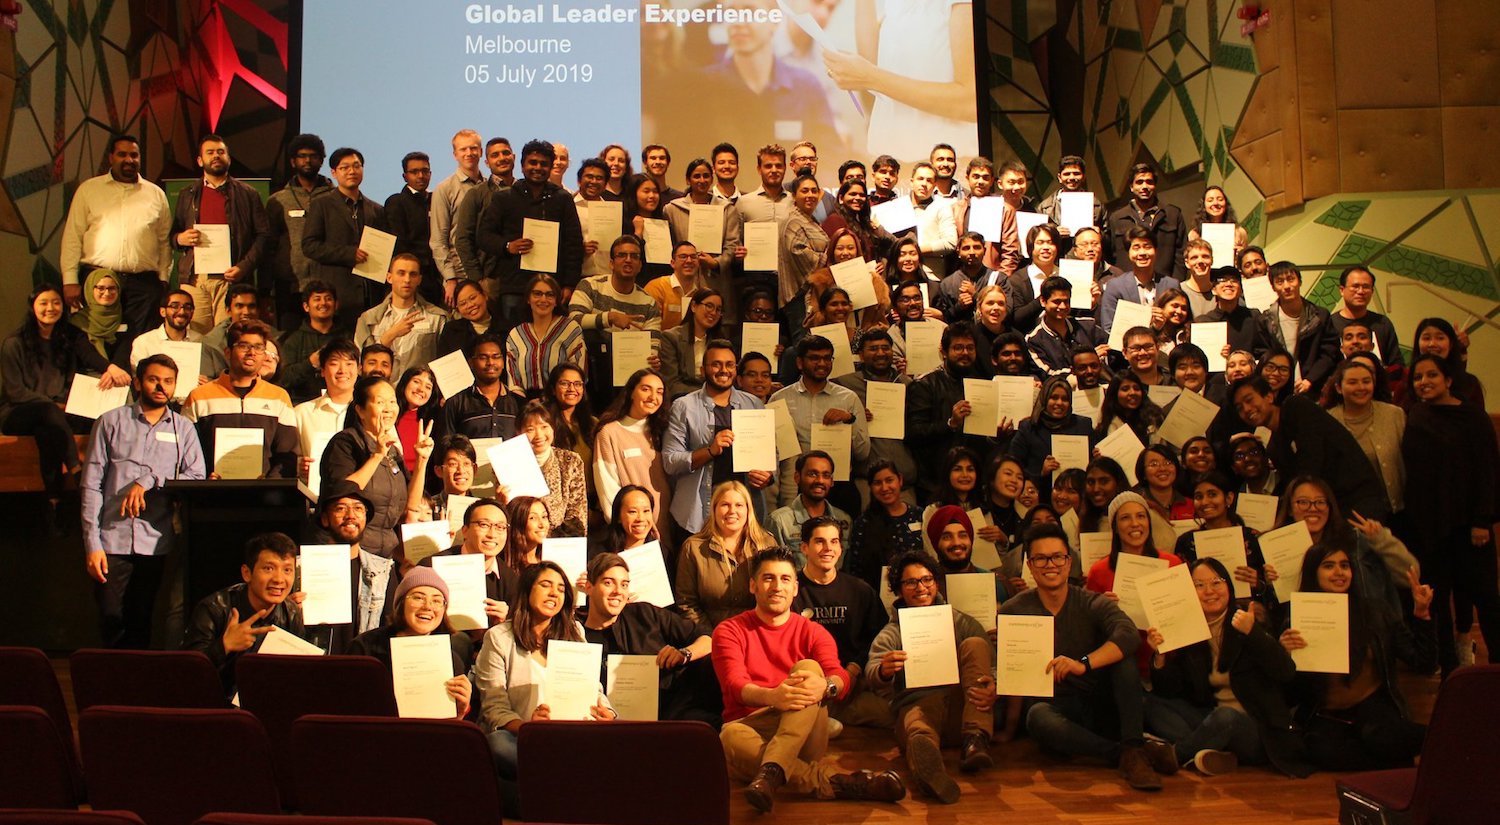 Students at the Global Leader Experience in Melbourne pose with completion certificates.